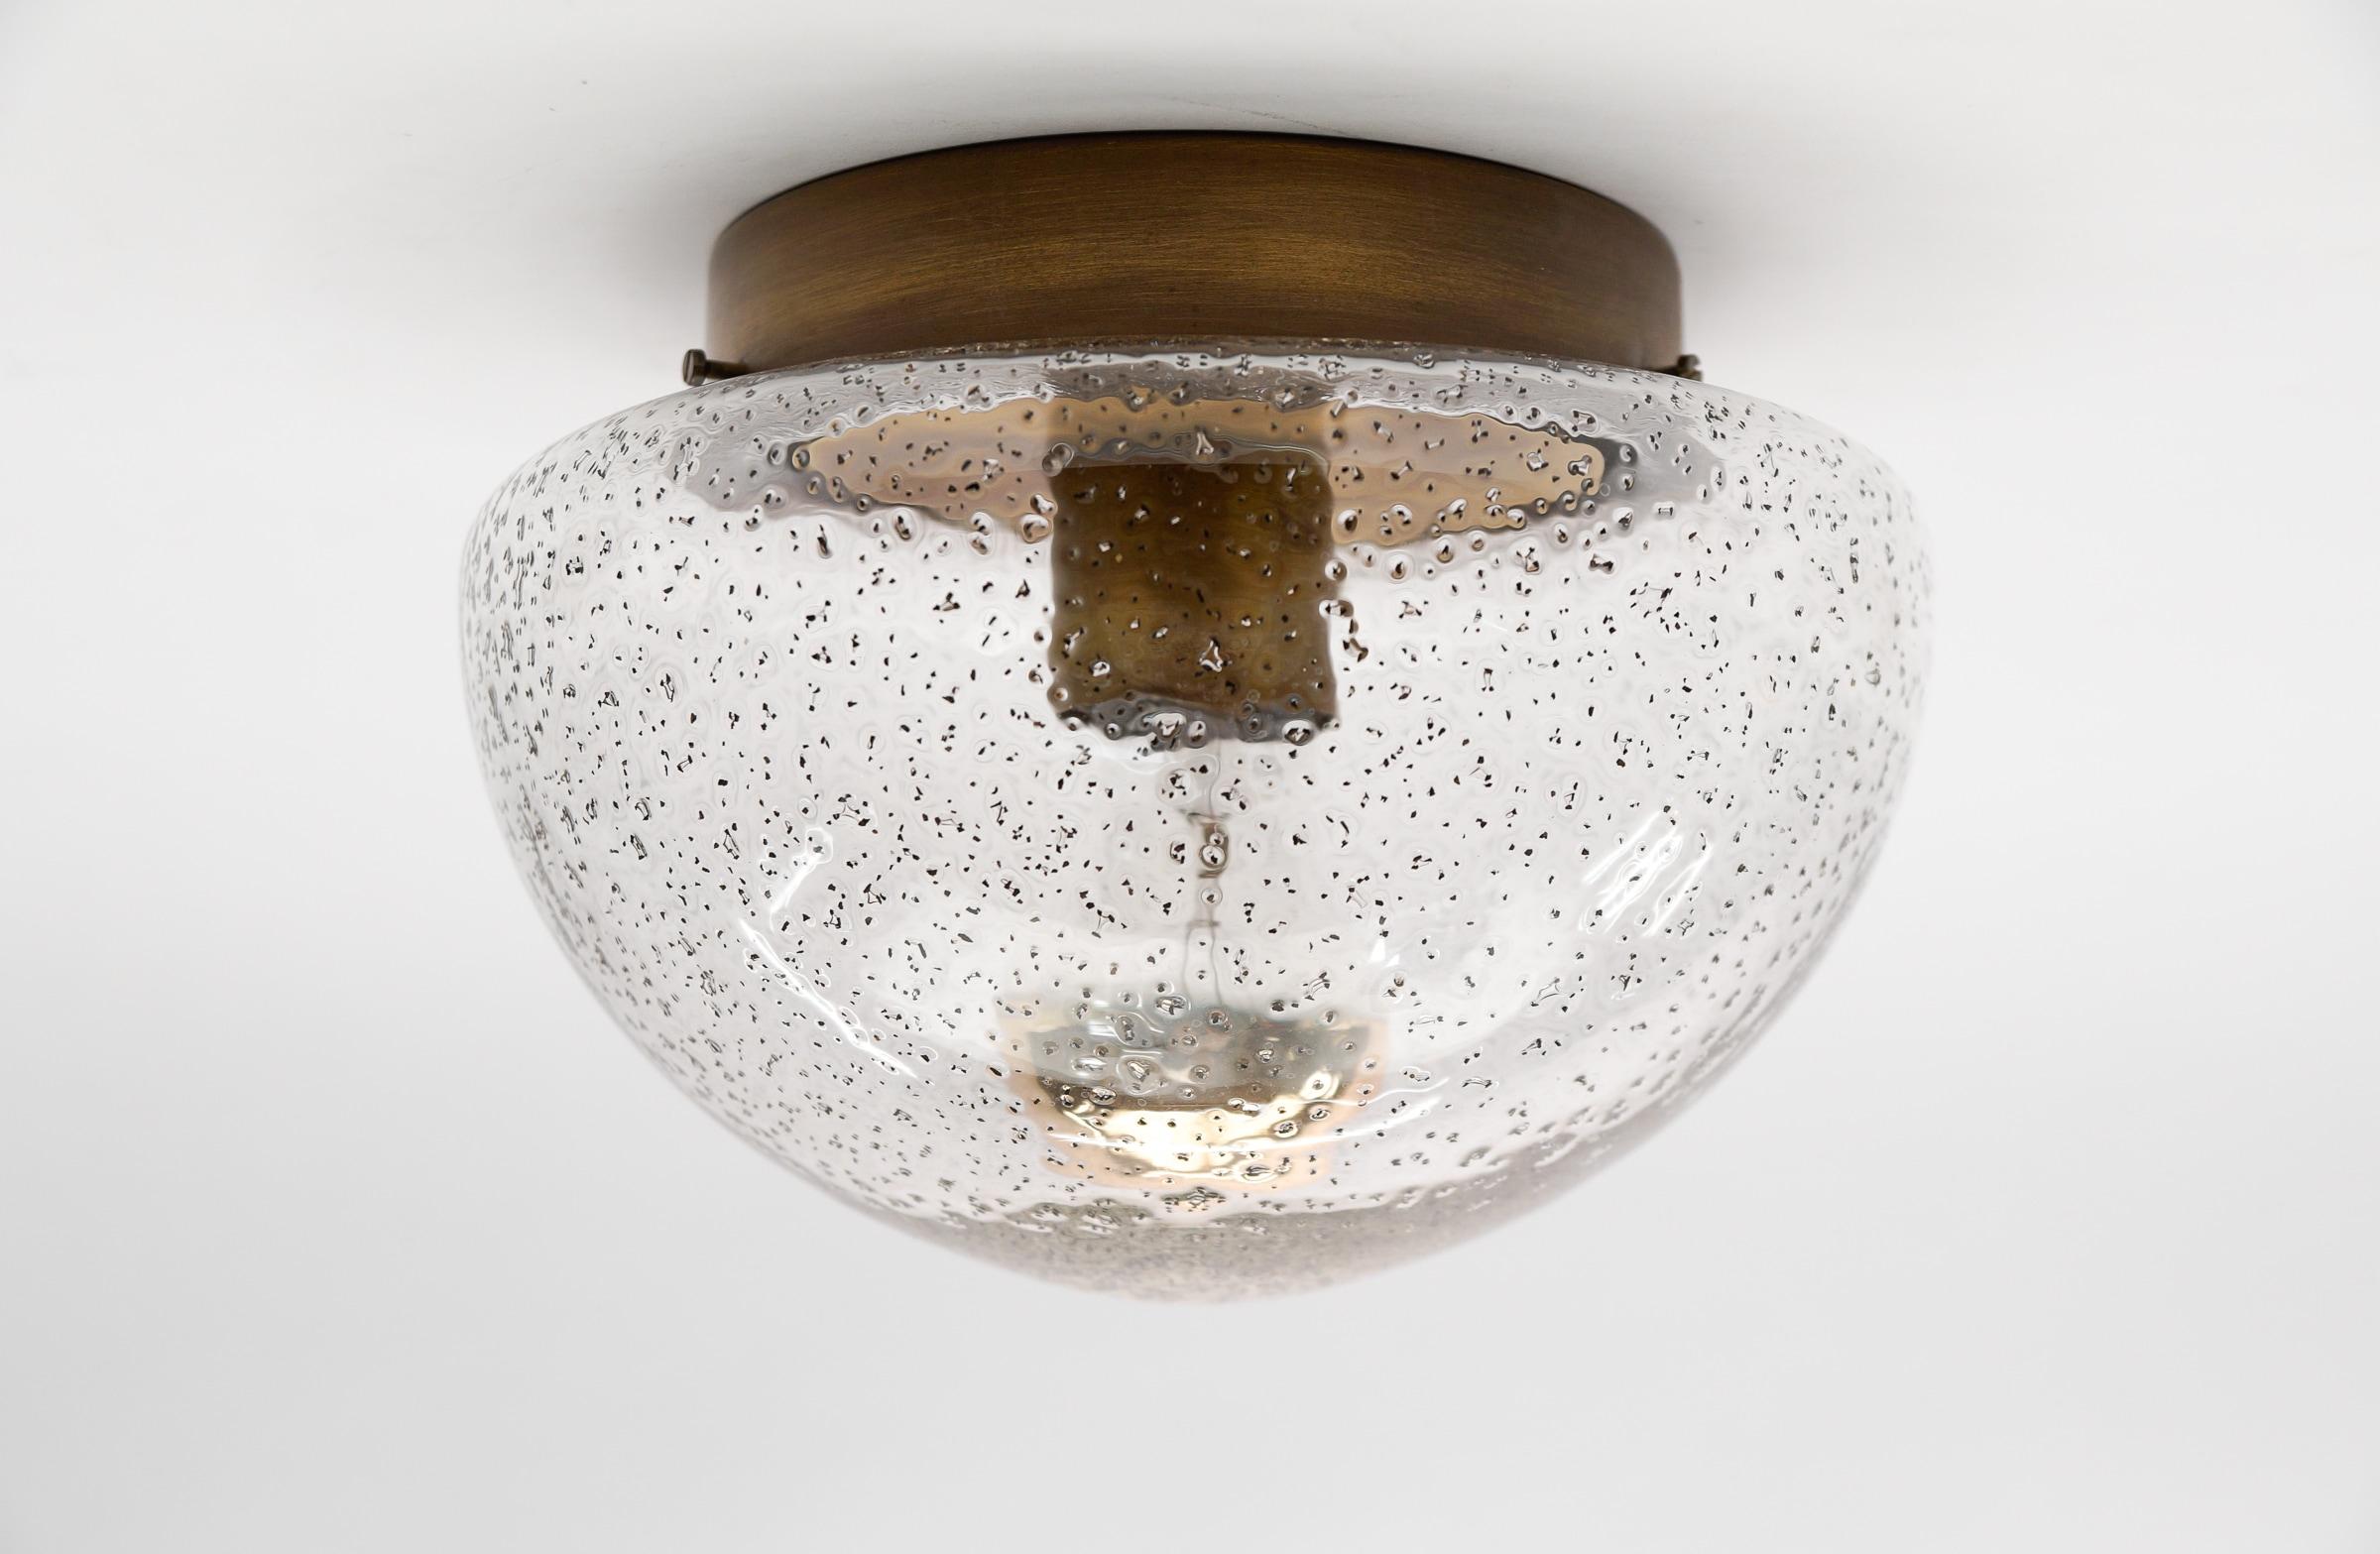 Petite Bronze Mushroom Shaped Glass Lamp, Germany 1960s

Dimensions
Height: 6.29 in. (16 cm)
Diameter: 9.05 in. (23 cm)

The fixture need 1 x E27 standard bulb with 60W max.

Light bulbs are not included.
It is possible to install this fixture in